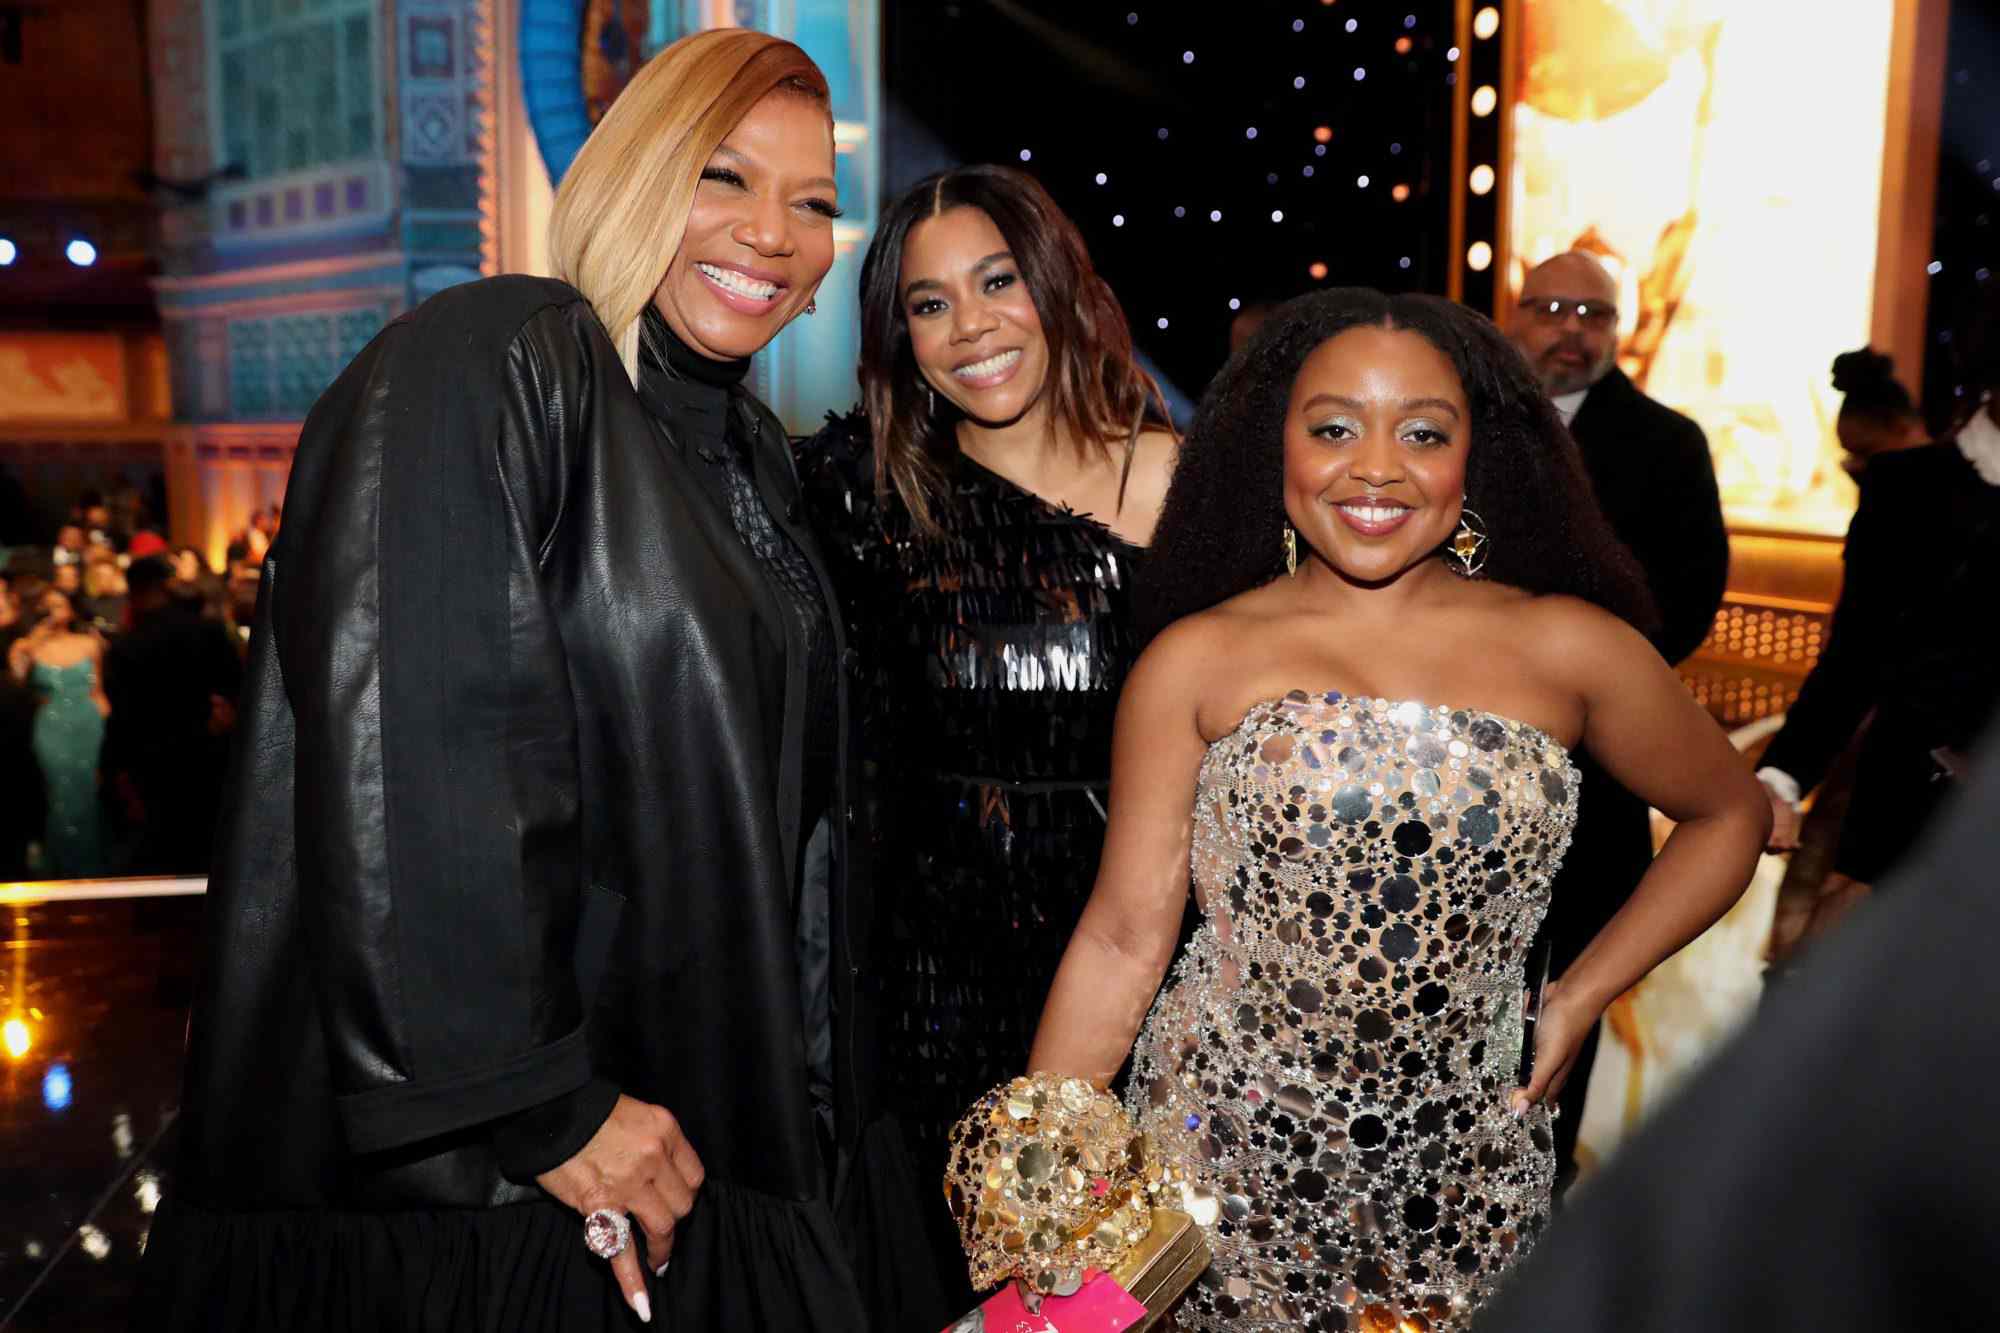 PASADENA, CALIFORNIA - FEBRUARY 25: (L-R) Host Queen Latifah, Regina Hall, and Quinta Brunson pose onstage during the 54th NAACP Image Awards at Pasadena Civic Auditorium on February 25, 2023 in Pasadena, California. (Photo by Johnny Nunez/Getty Images for BET)